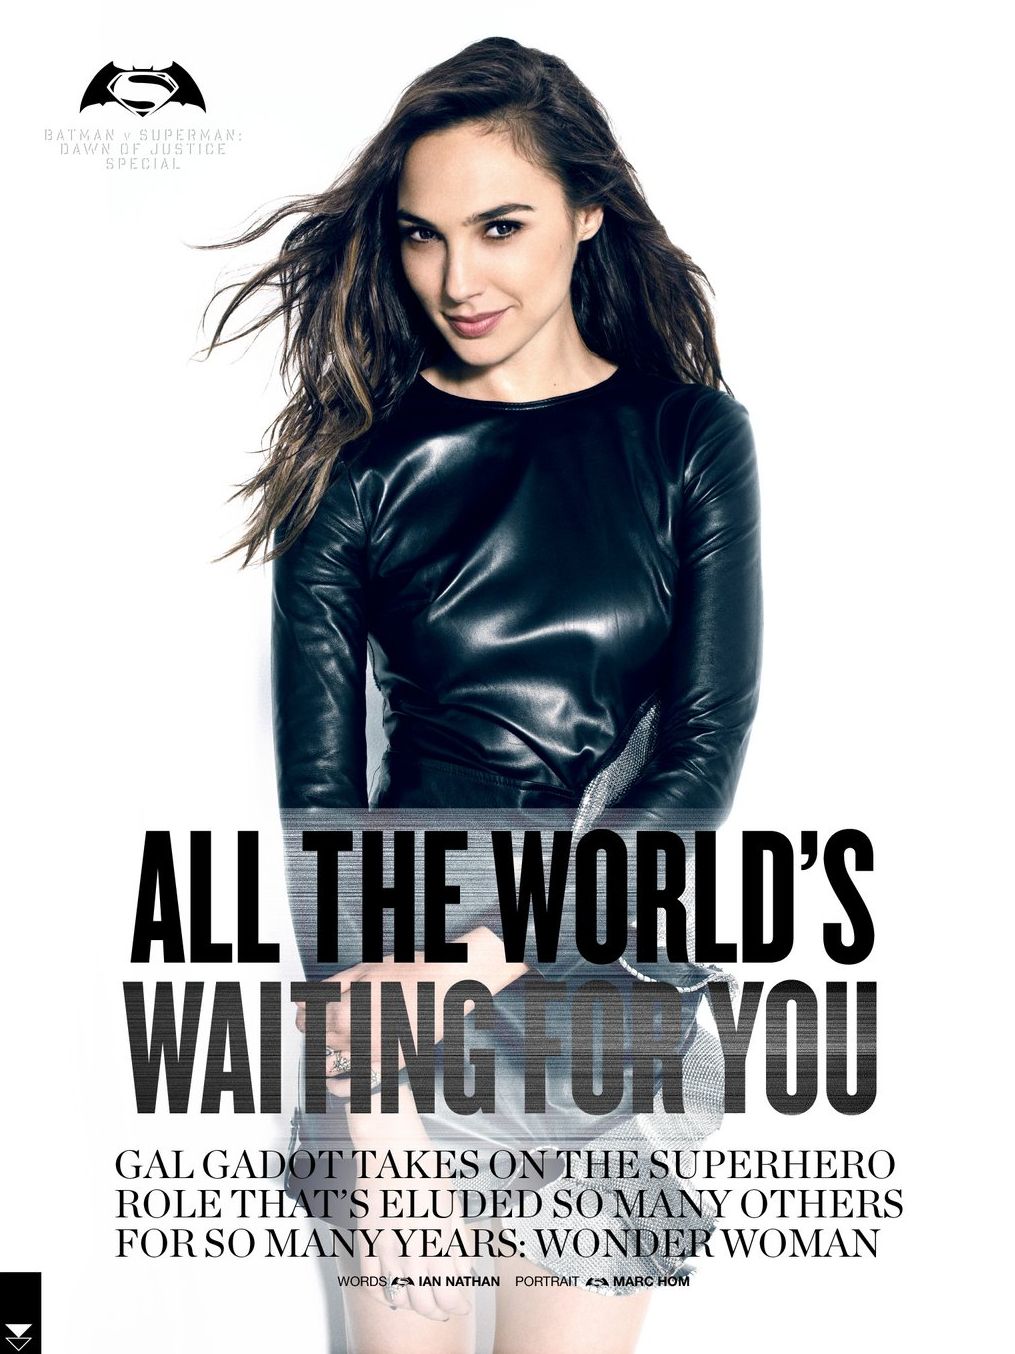 Gal Gadot highlighted in March cover of Empire